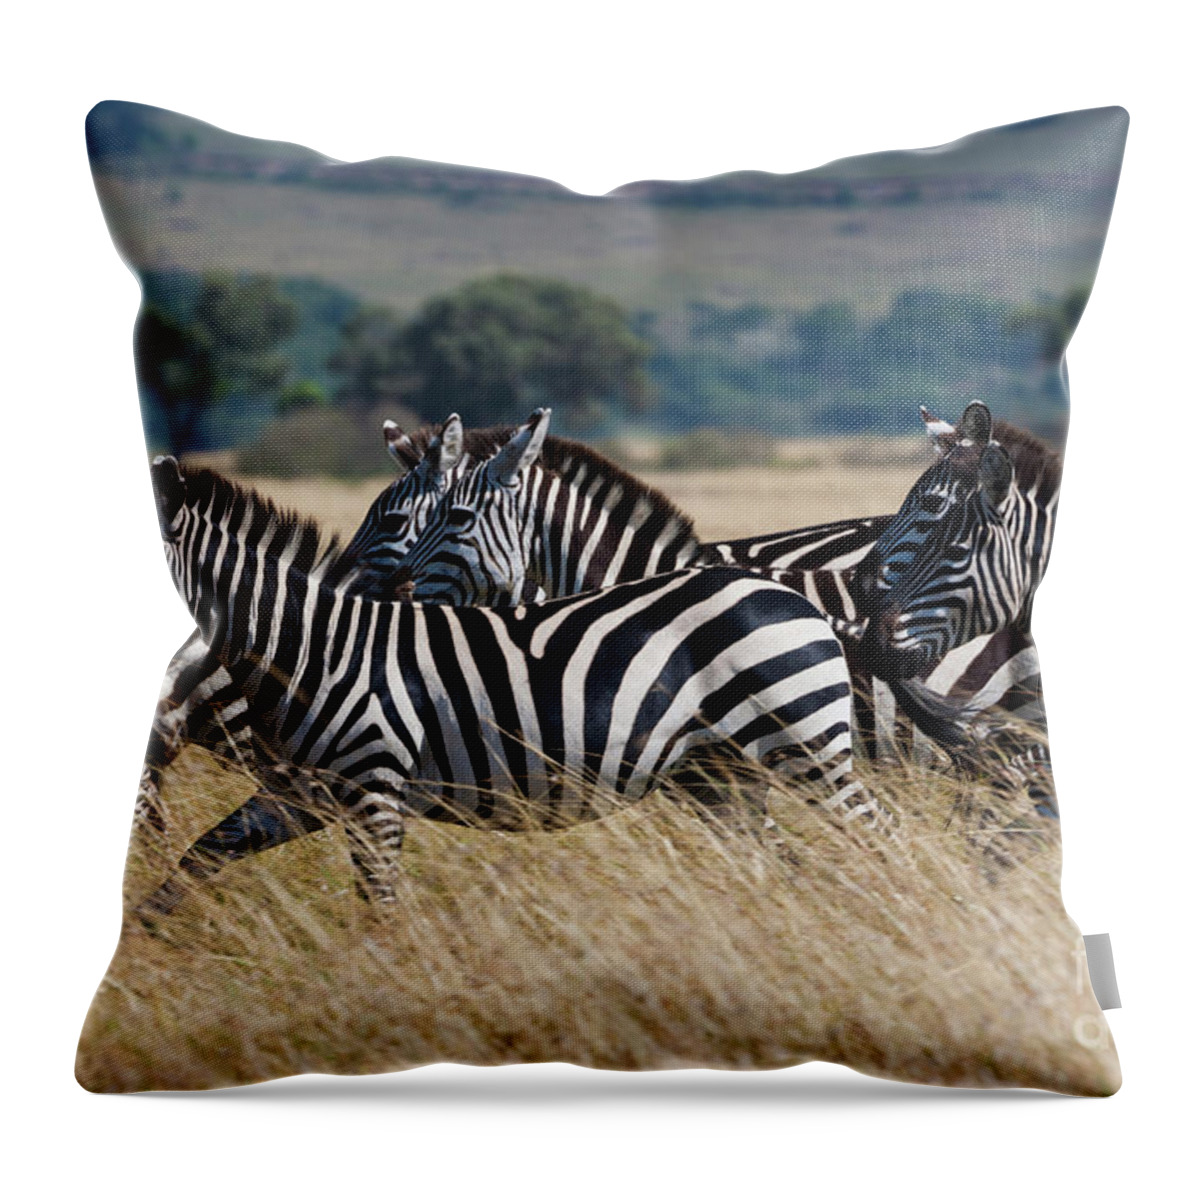 Scenics Throw Pillow featuring the photograph Grants Zebras, Kenya by Mint Images/ Art Wolfe